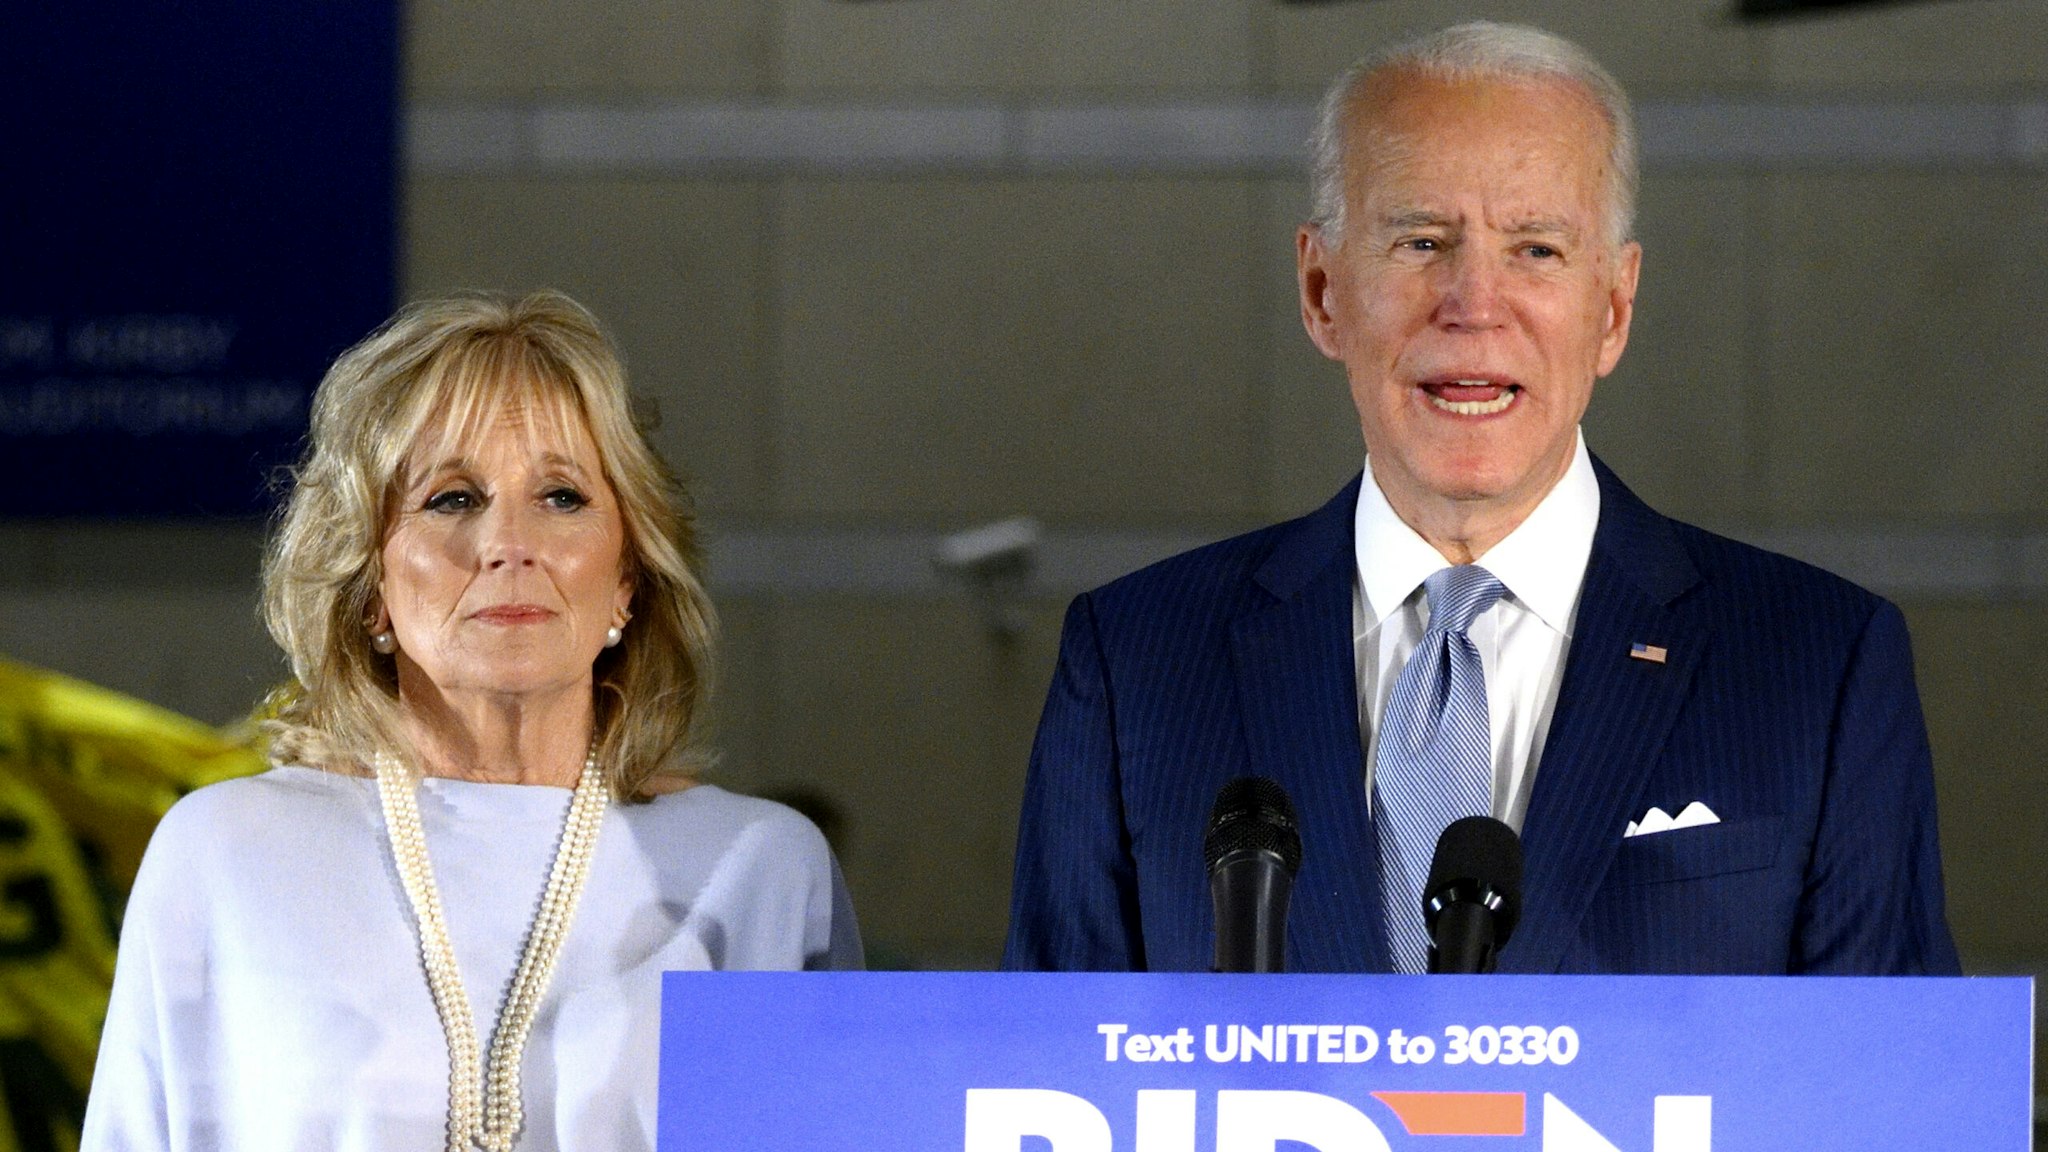 Former Vice President Joe Biden, sided by Dr. Jill Biden, delivers remarks at the National Constitution Center in Philadelphia, PA on March 10, 2020. Biden canceled an earlier scheduled campaign event in Cleveland, OH due to health concerns regarding COVID-19 Coronavirus at large gatherings.